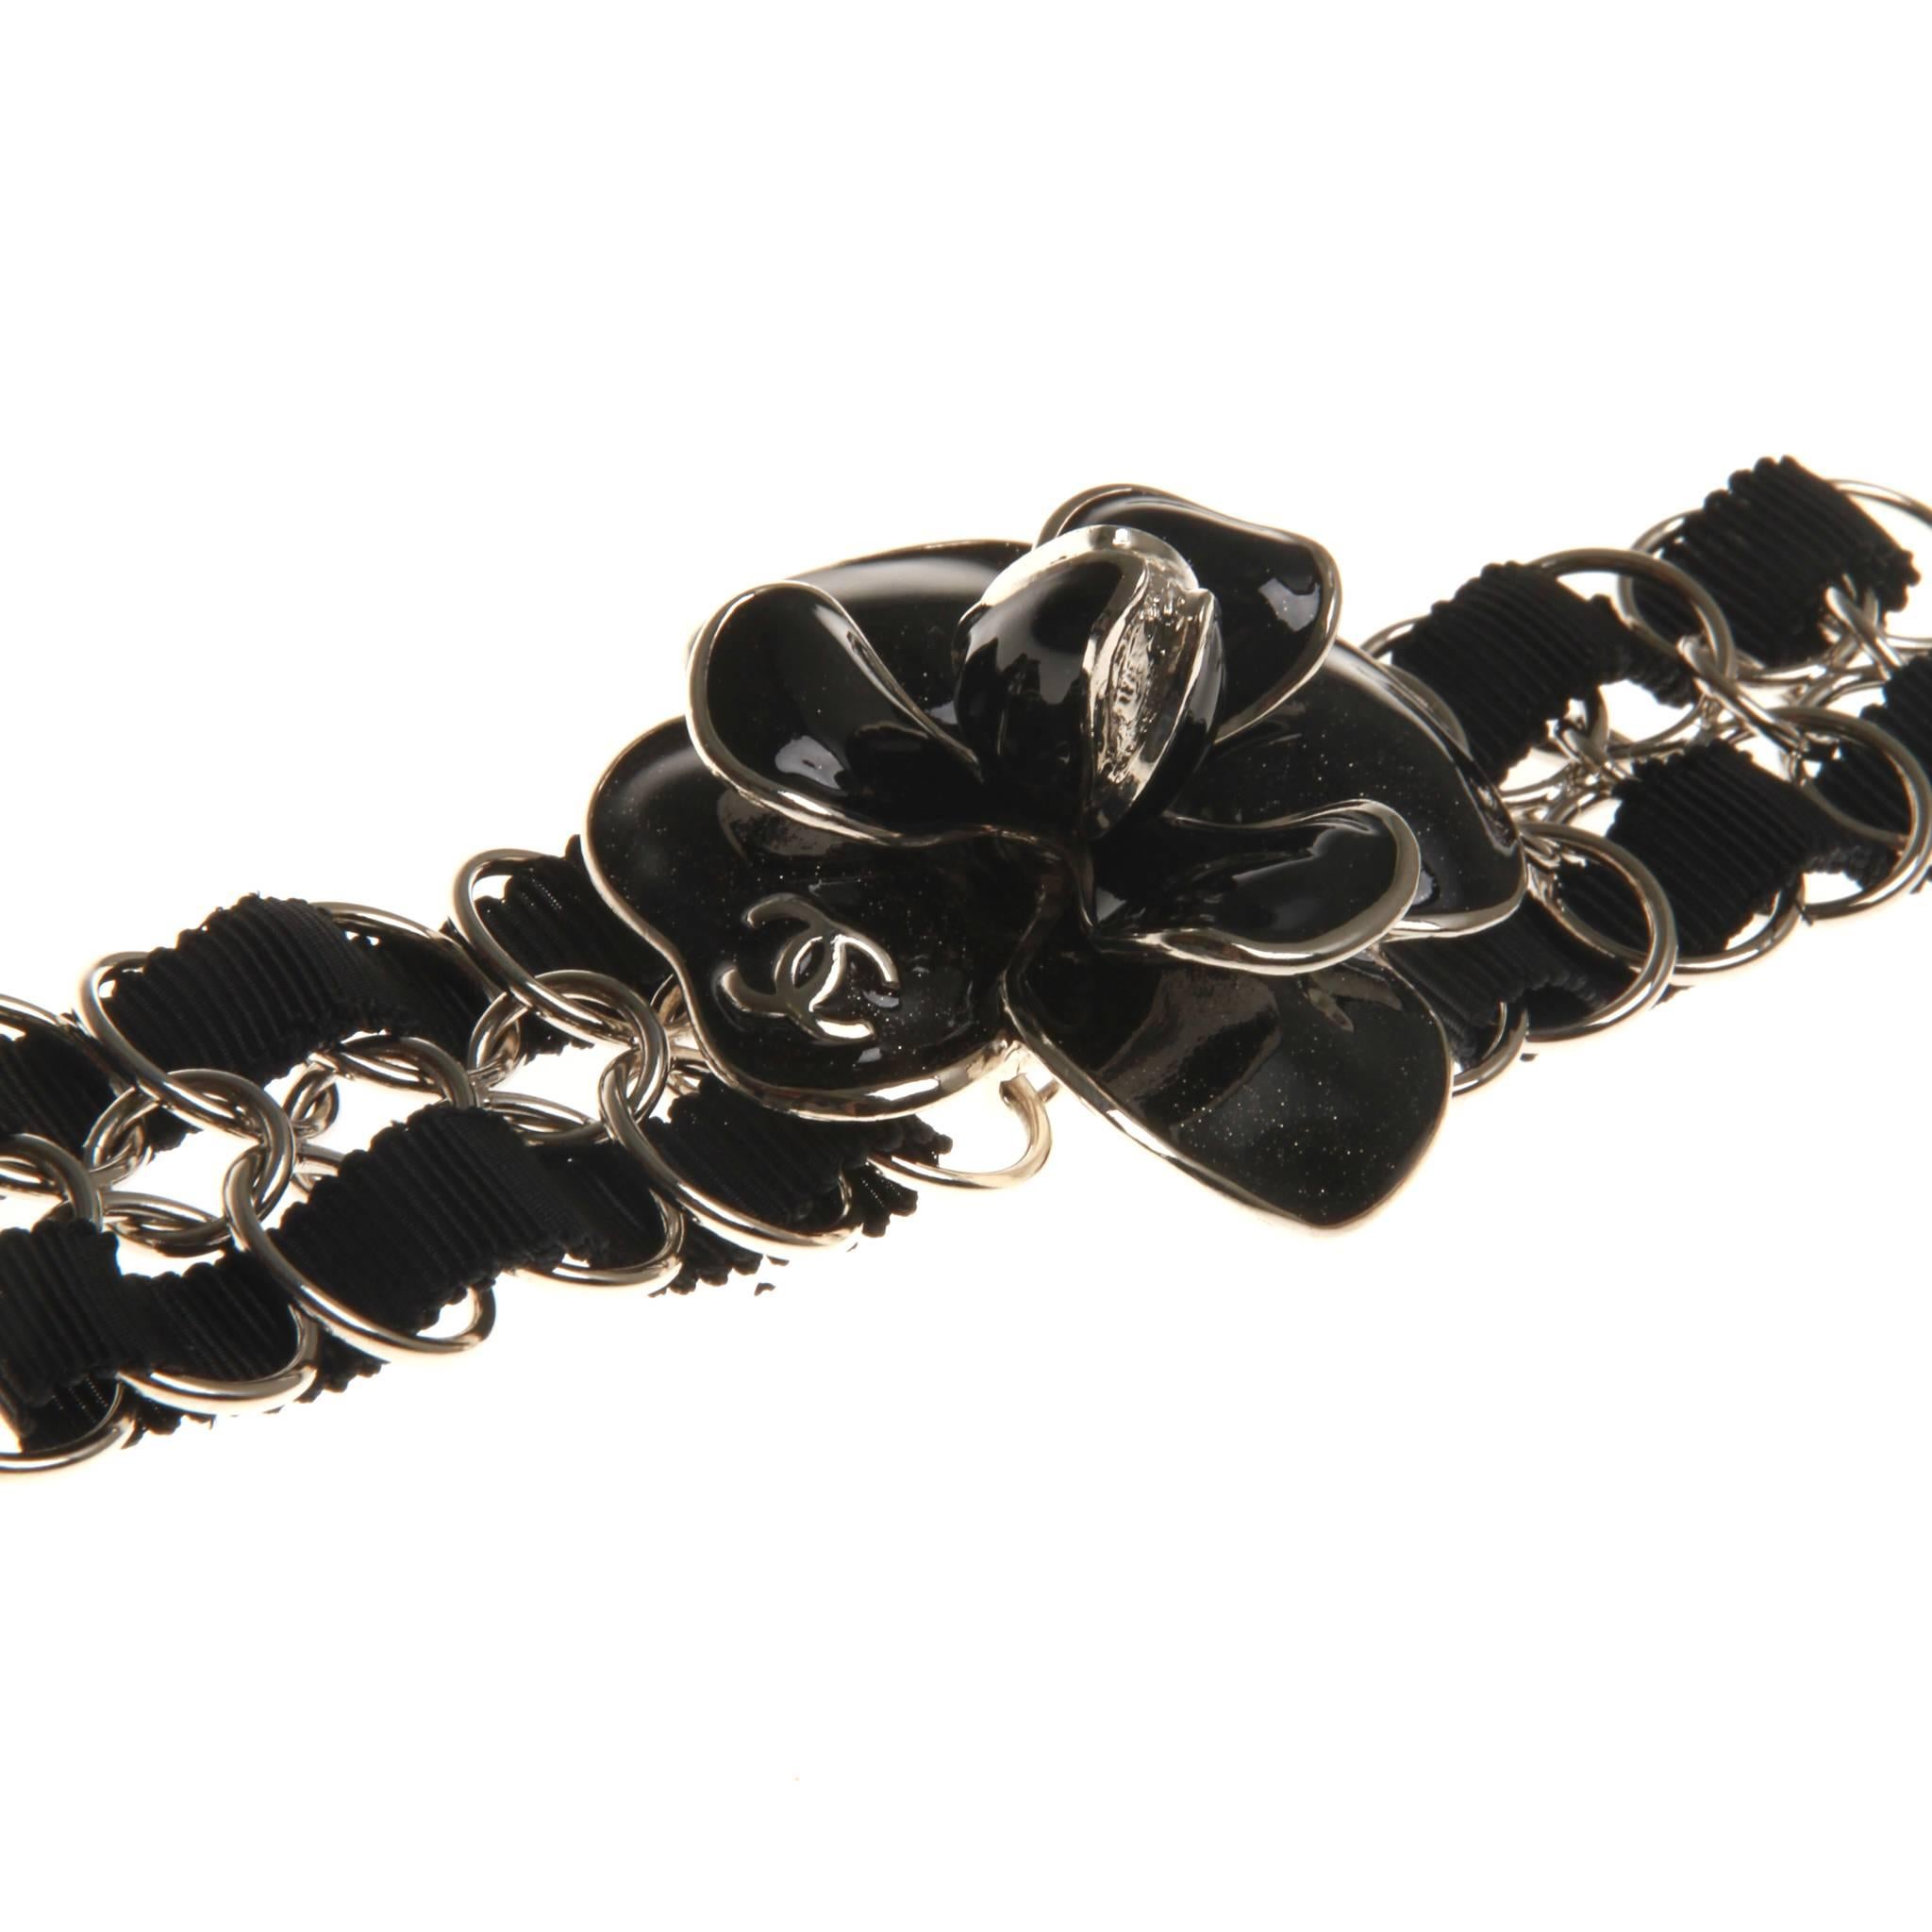 From the Spring 2008 Collection. Black shimmery Chanel Enamel Camellia Bracelet with silver-tone hardware, interlocking CC logo detail, chain-link detail and lobster-clasp closure.

With box and jewellery pouch. 